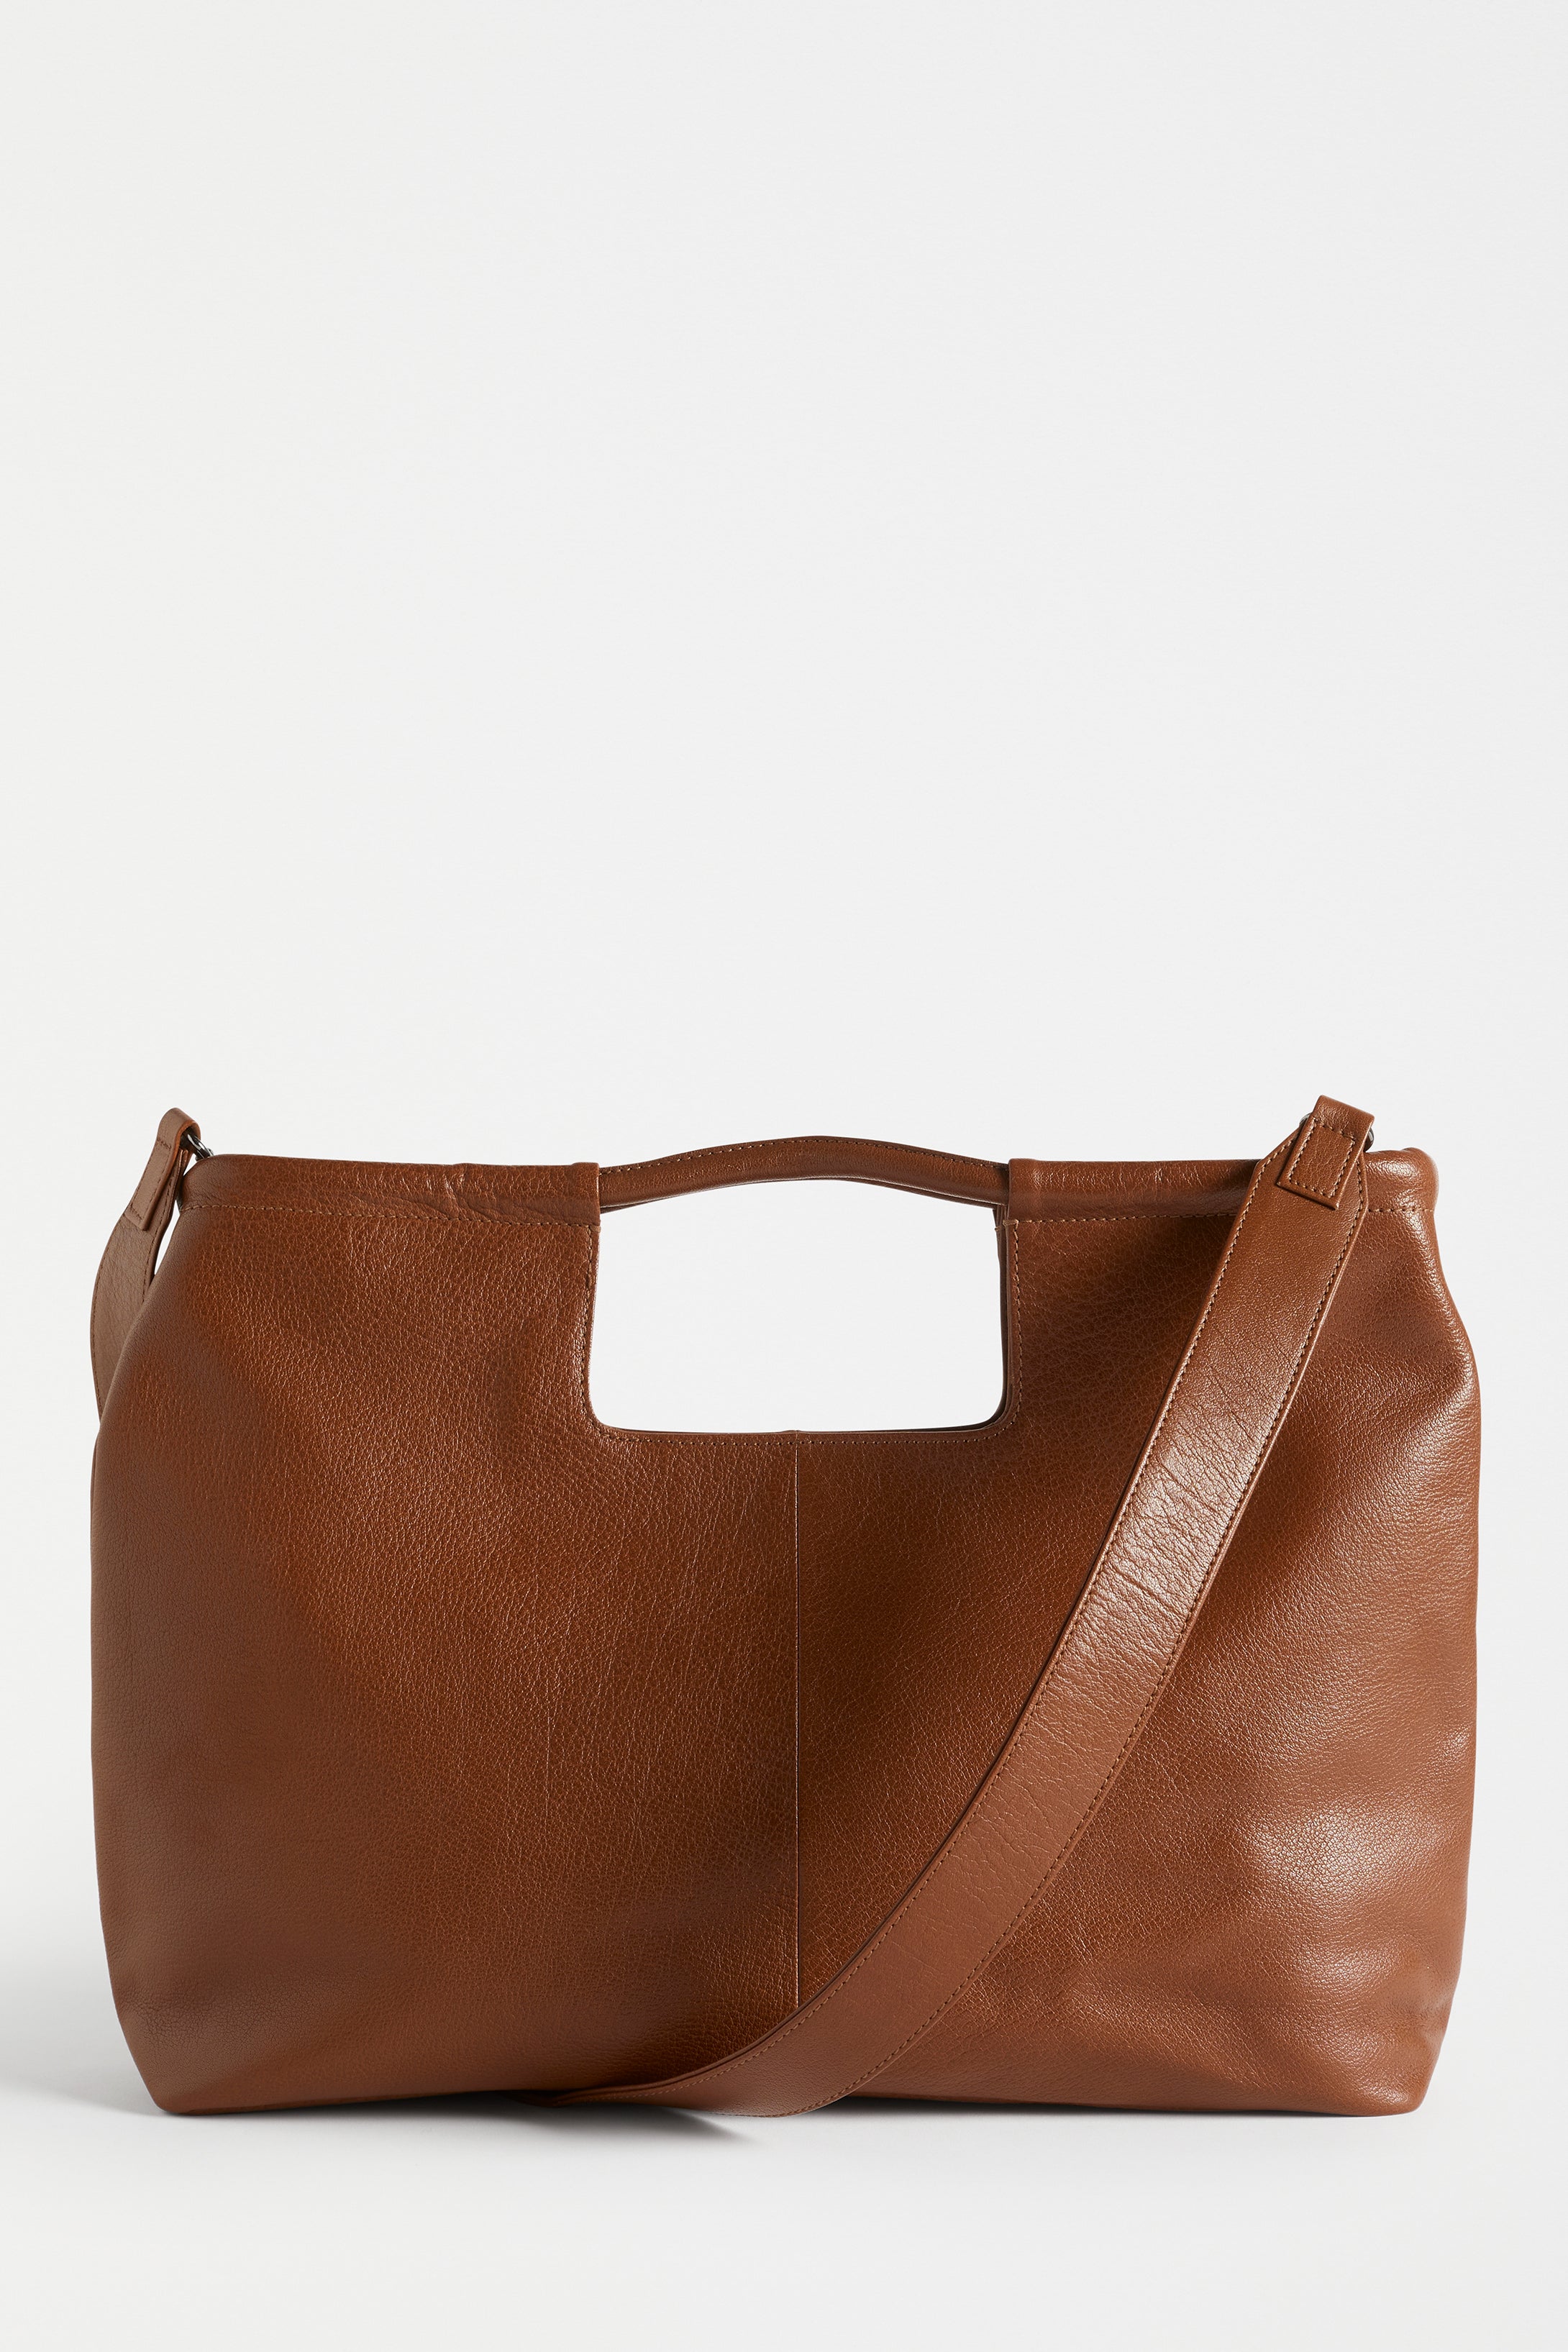 Ista Leather Work Bag with Detachable Strap Front | TAN